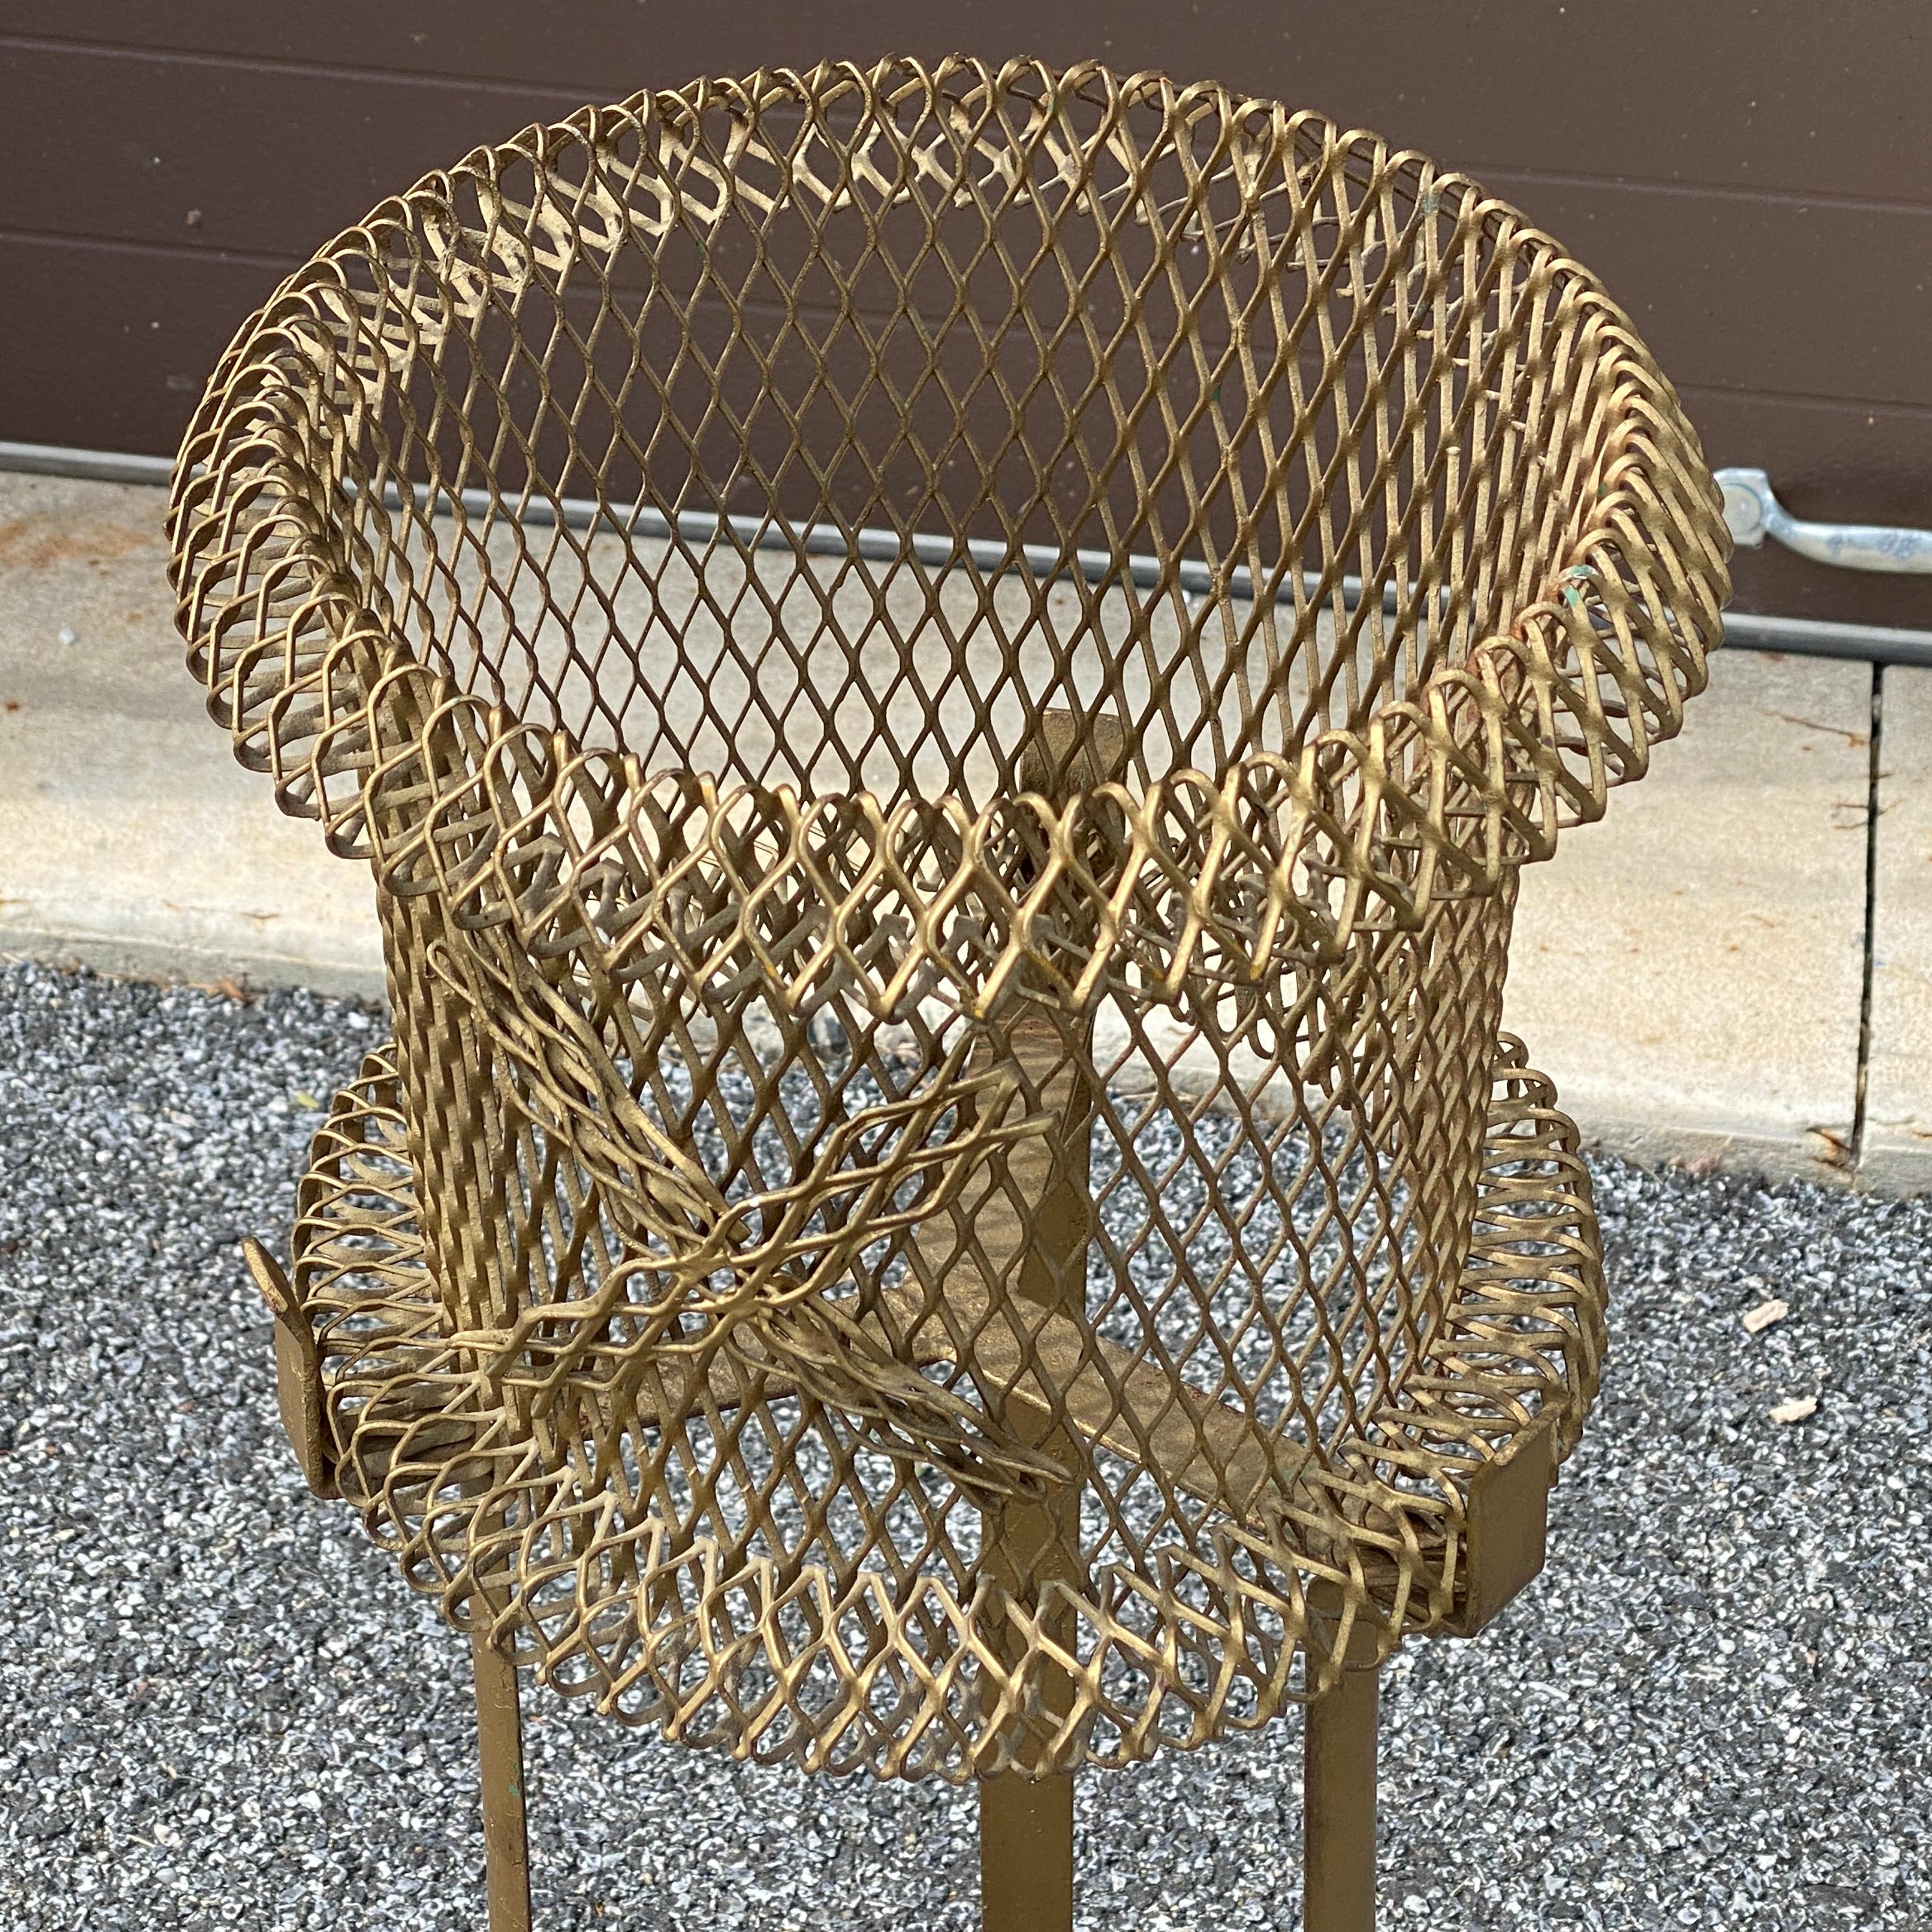 Mid-Century Modern Steel Mesh Planter Plant Stand in the style of Mathieu Matégot. With old gold painted finish circa mid 20th century unmarked. 

Inside diameter of planter is 9.5” at top and tapered down to 8.5” at base